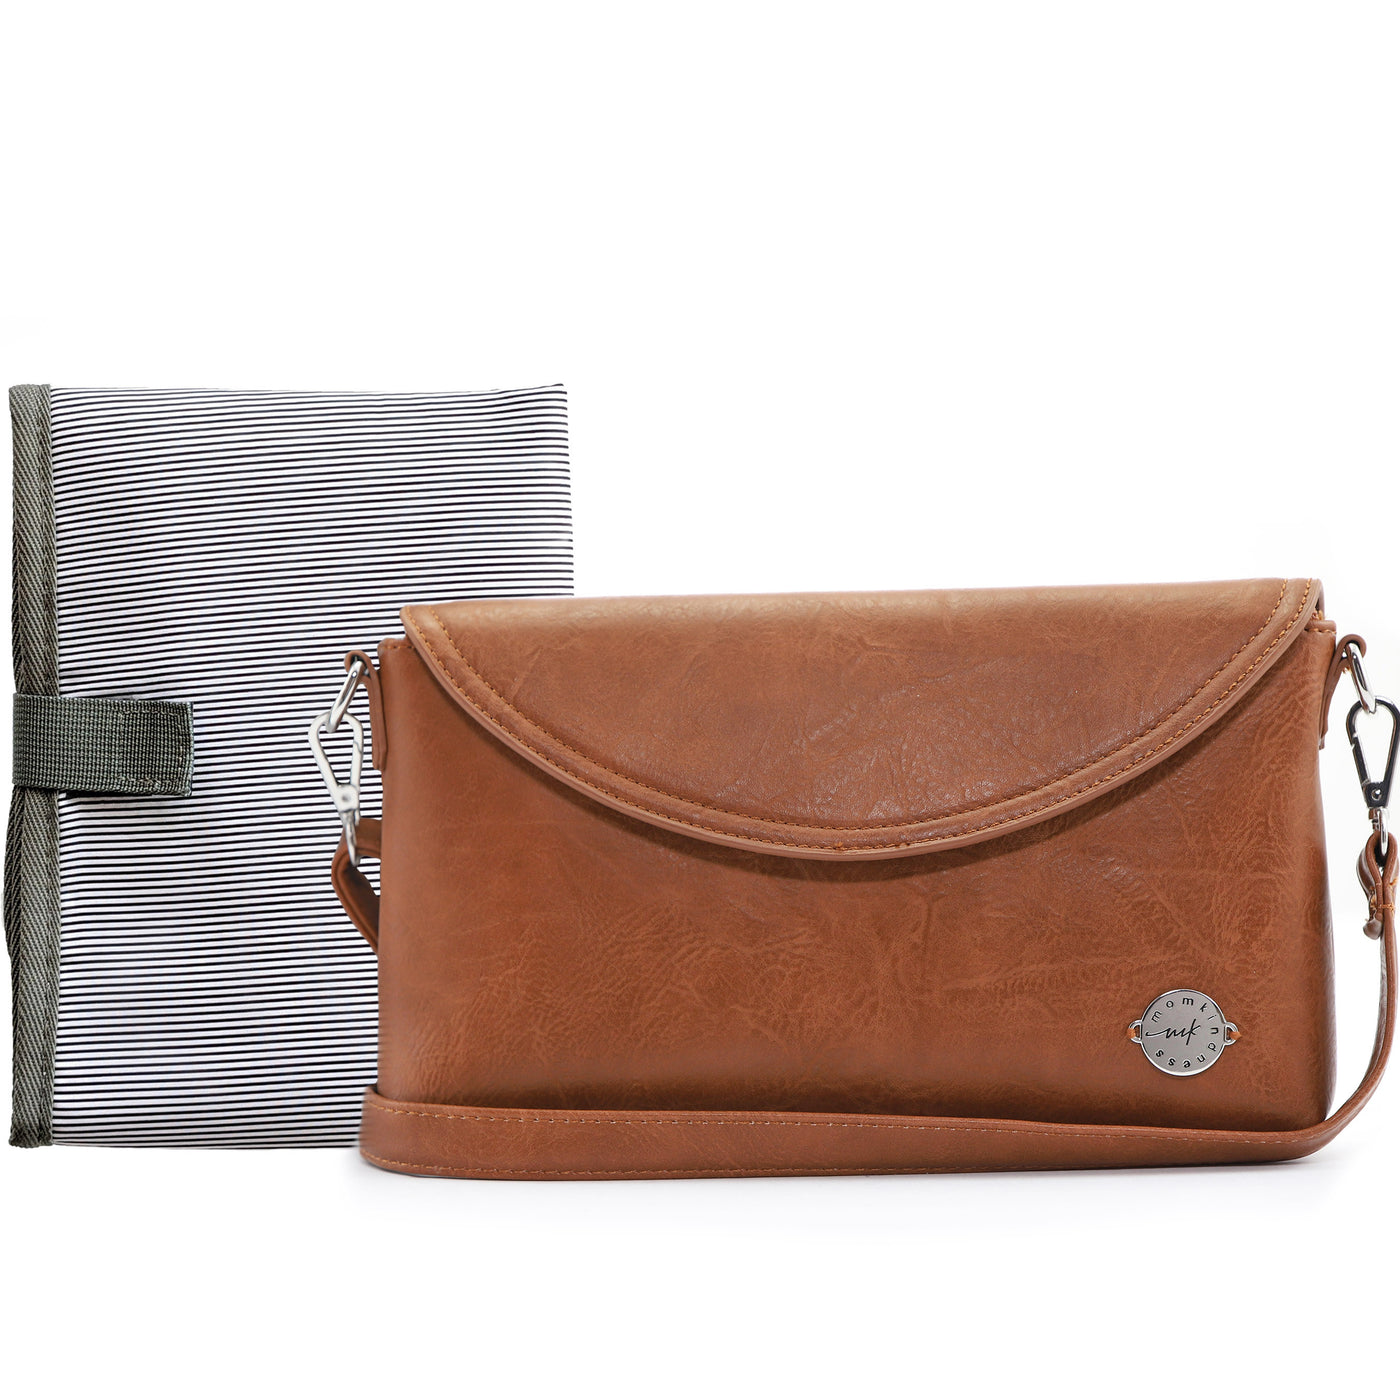 Caramel brown vegan leather clutch with crossbody strap on white tabletop, with folded B&W striped changing mat behind it. 